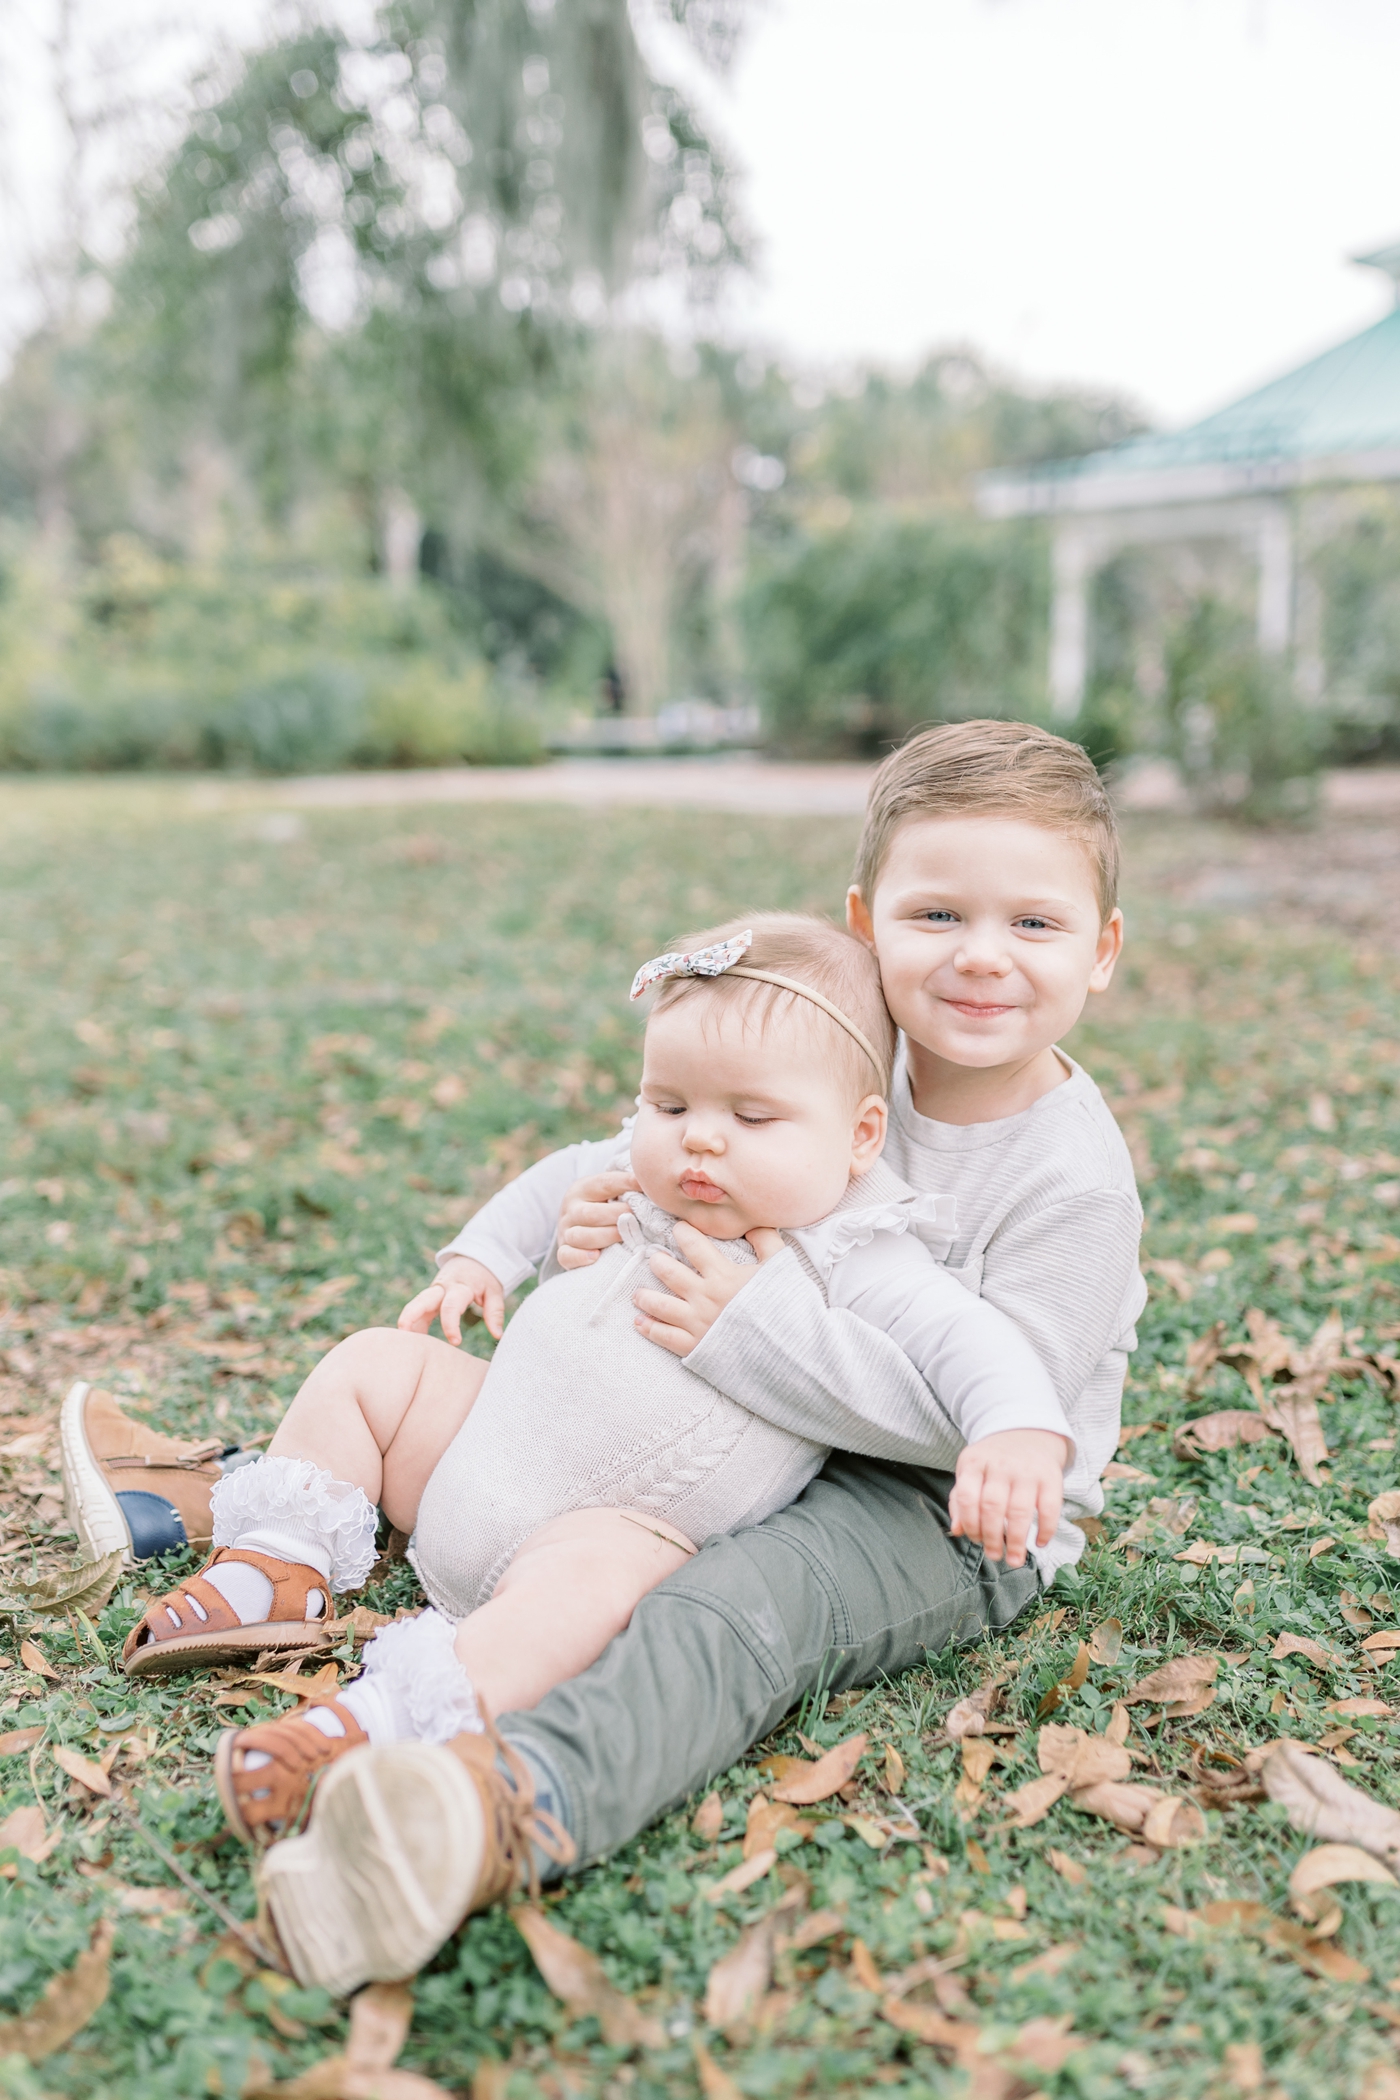 Baby sitting on big brother's lap during family photoshoot in Charleston, SC. Photo by Caitlyn Motycka Photography.